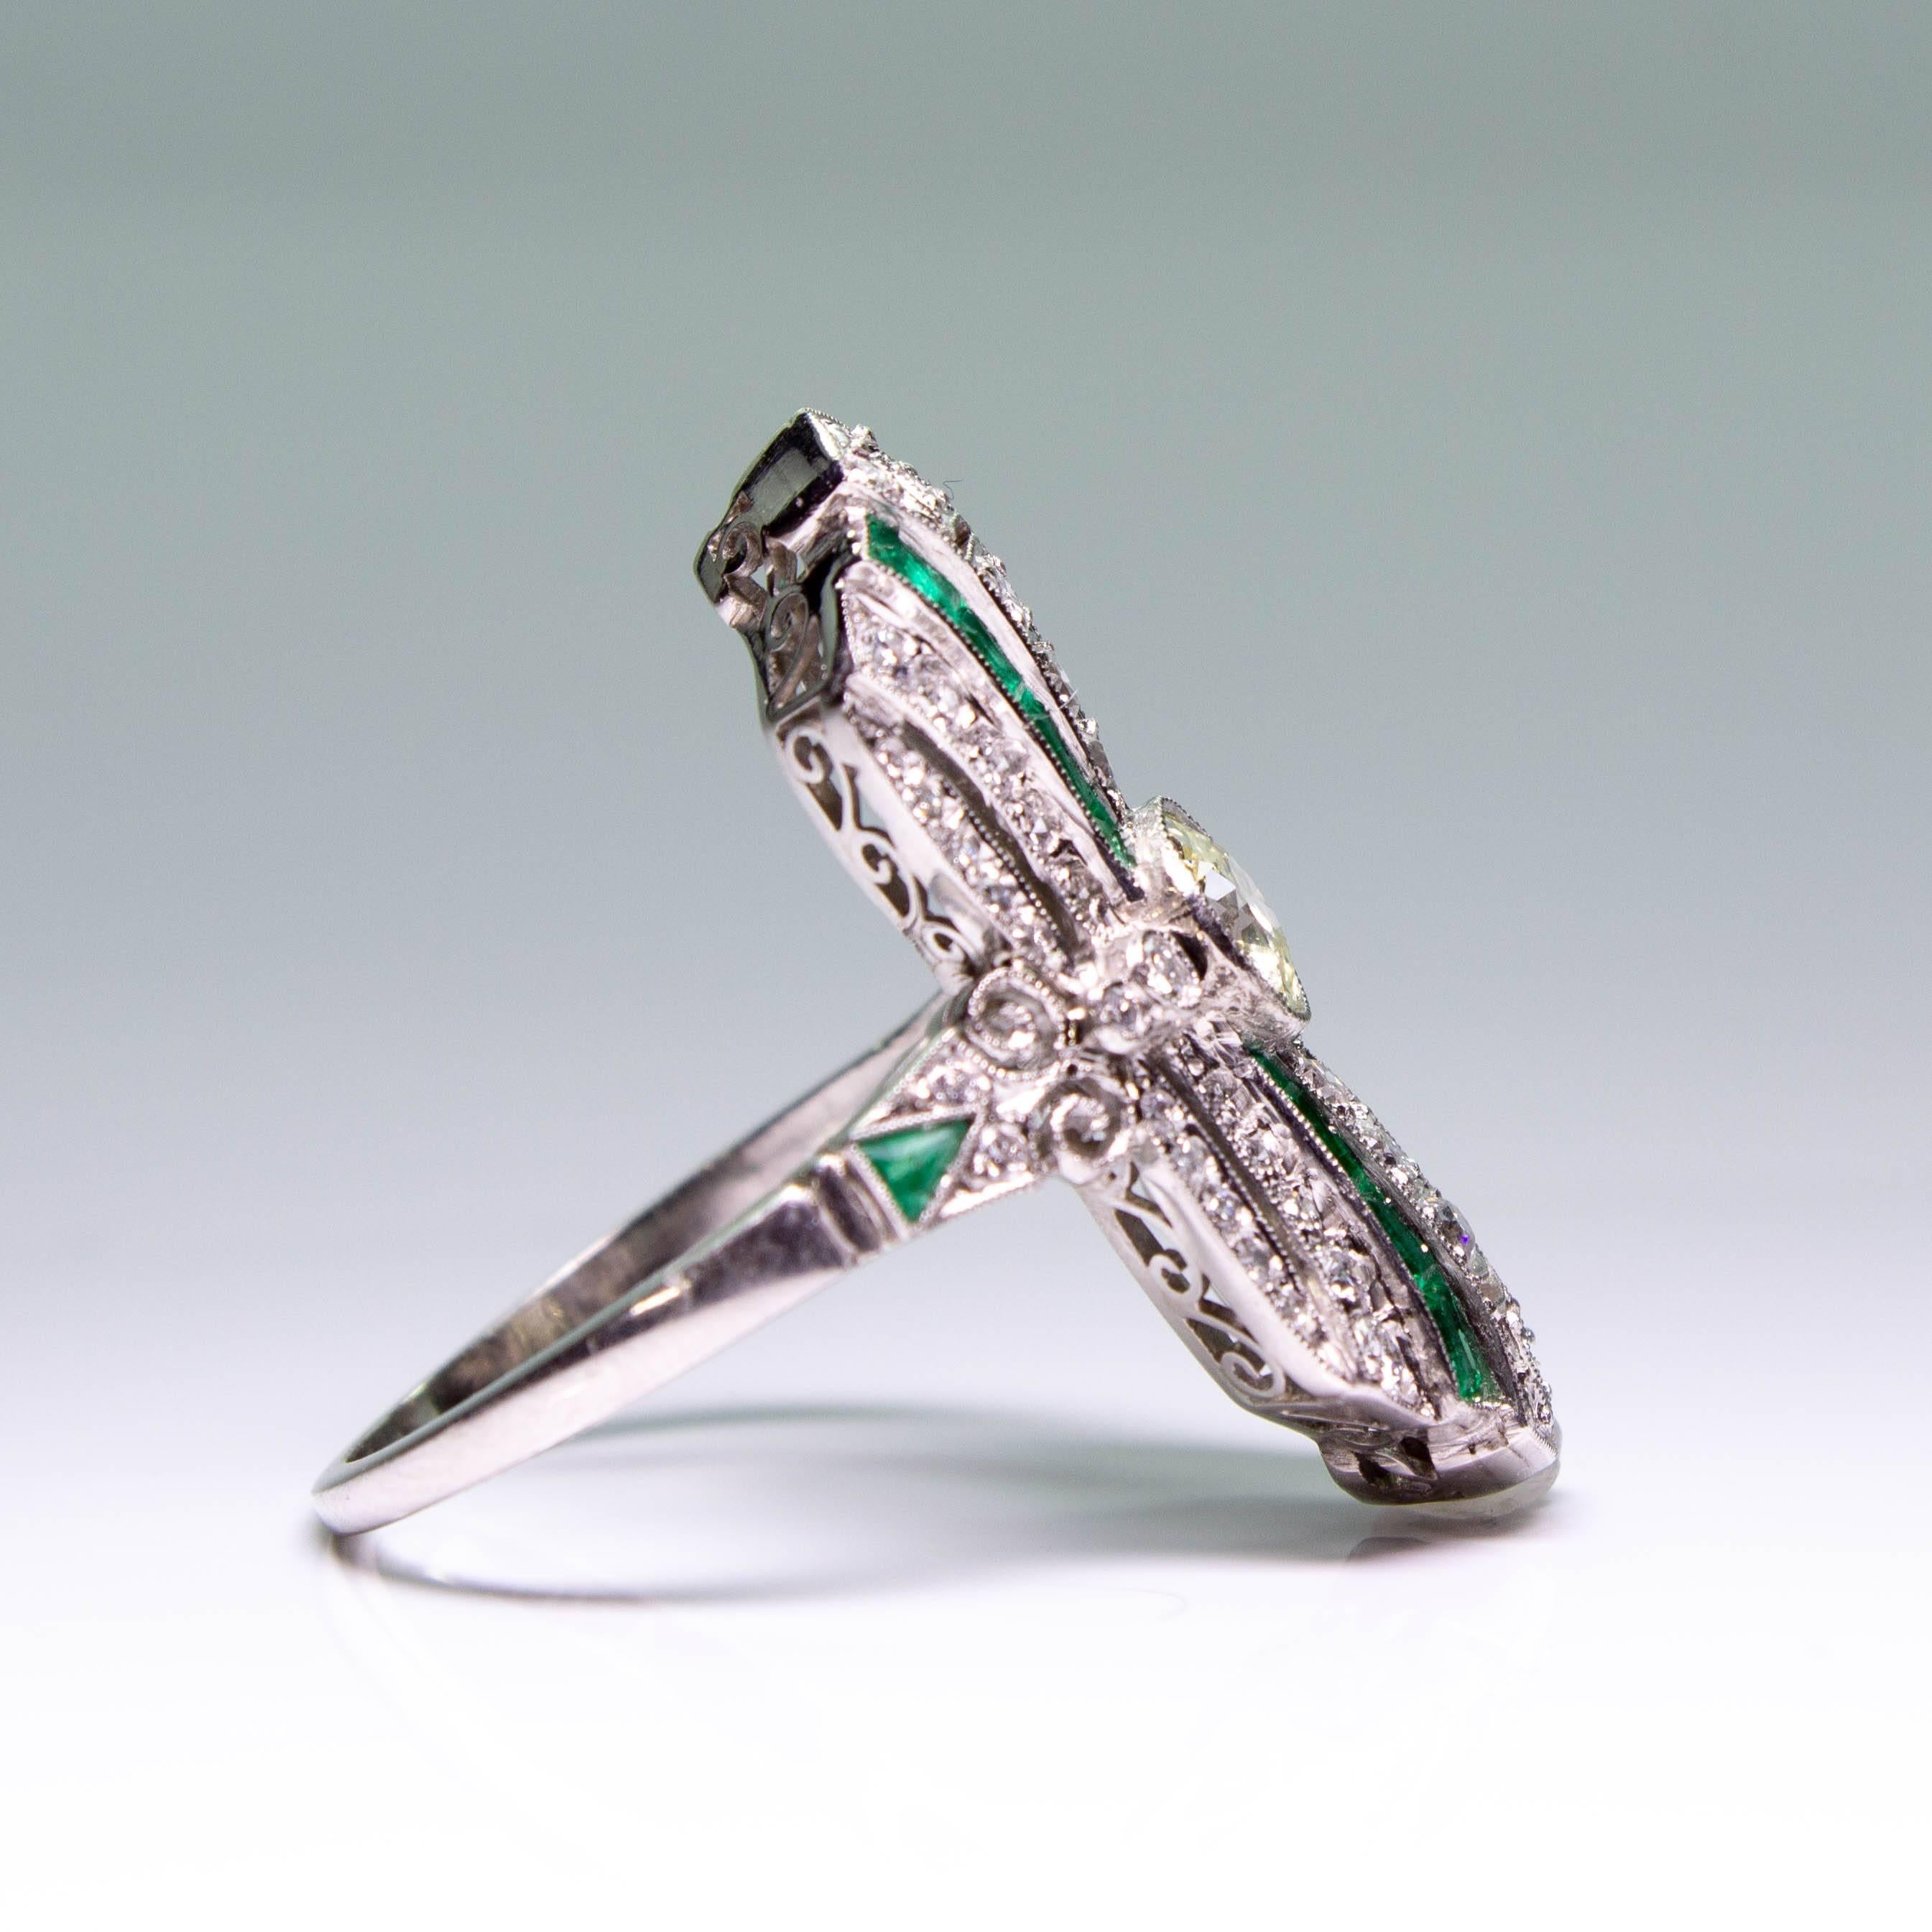 Composition: Platinum
Stones:
•	1 Old mine cut diamonds of J-VS2 quality that weigh 0.51ctw. 
•	56 Old European cut diamonds of I/J-VS2 quality that weigh 0.77ctw.
•	18 natural calibrated cut emeralds that weigh 0.69ctw.
Ring size: 7 ¾    
Ring